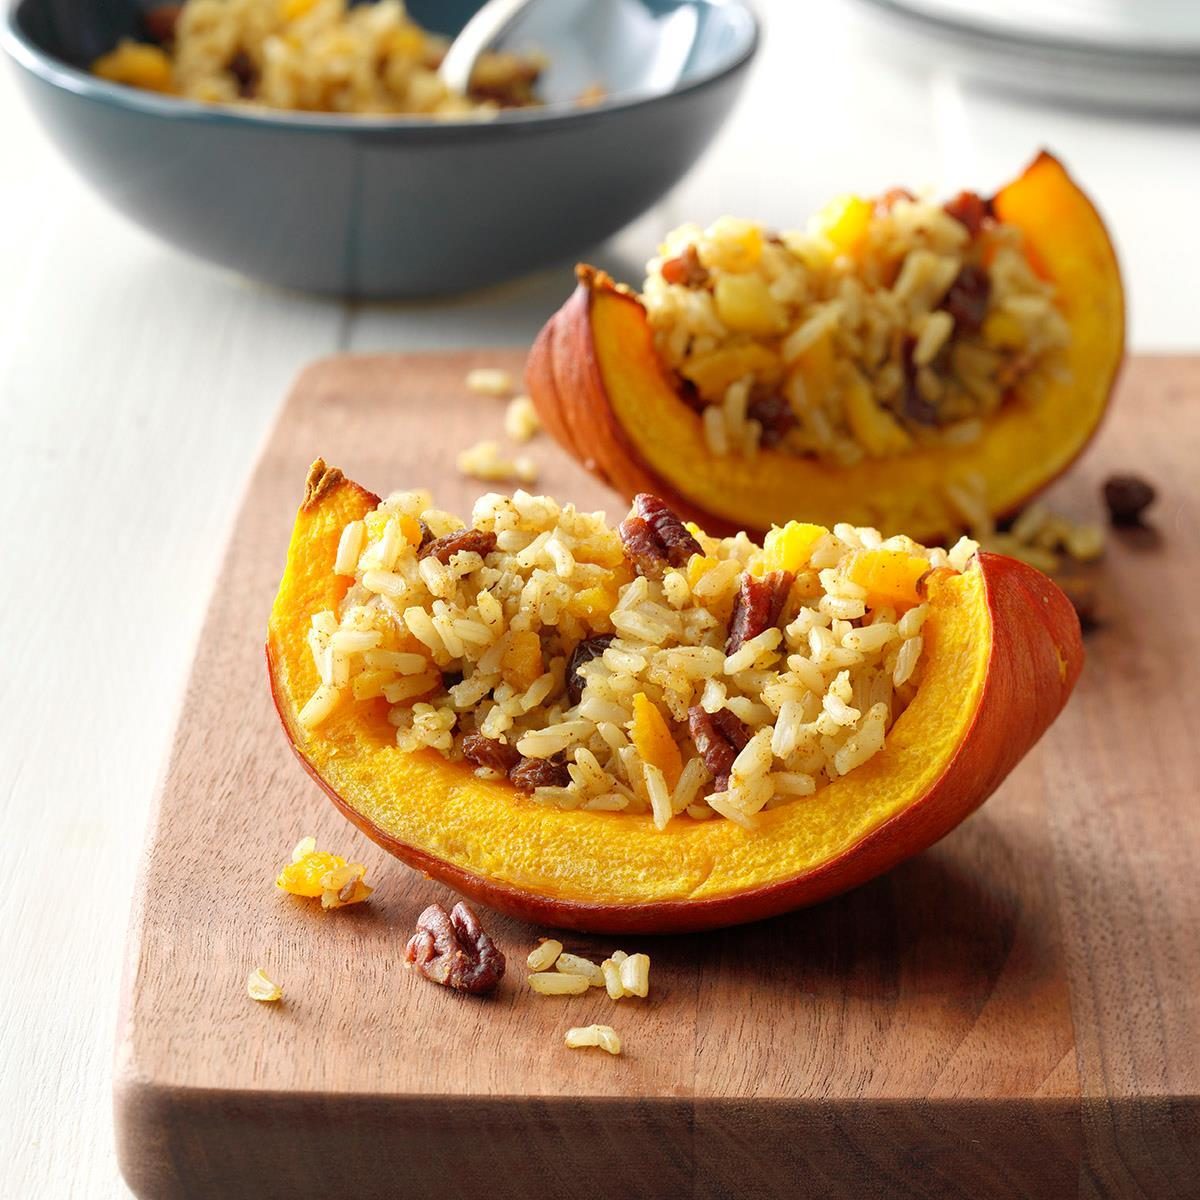 Scented Rice In Baked Pumpkin Exps Pcbbz19 40481 E09 19 1b 18